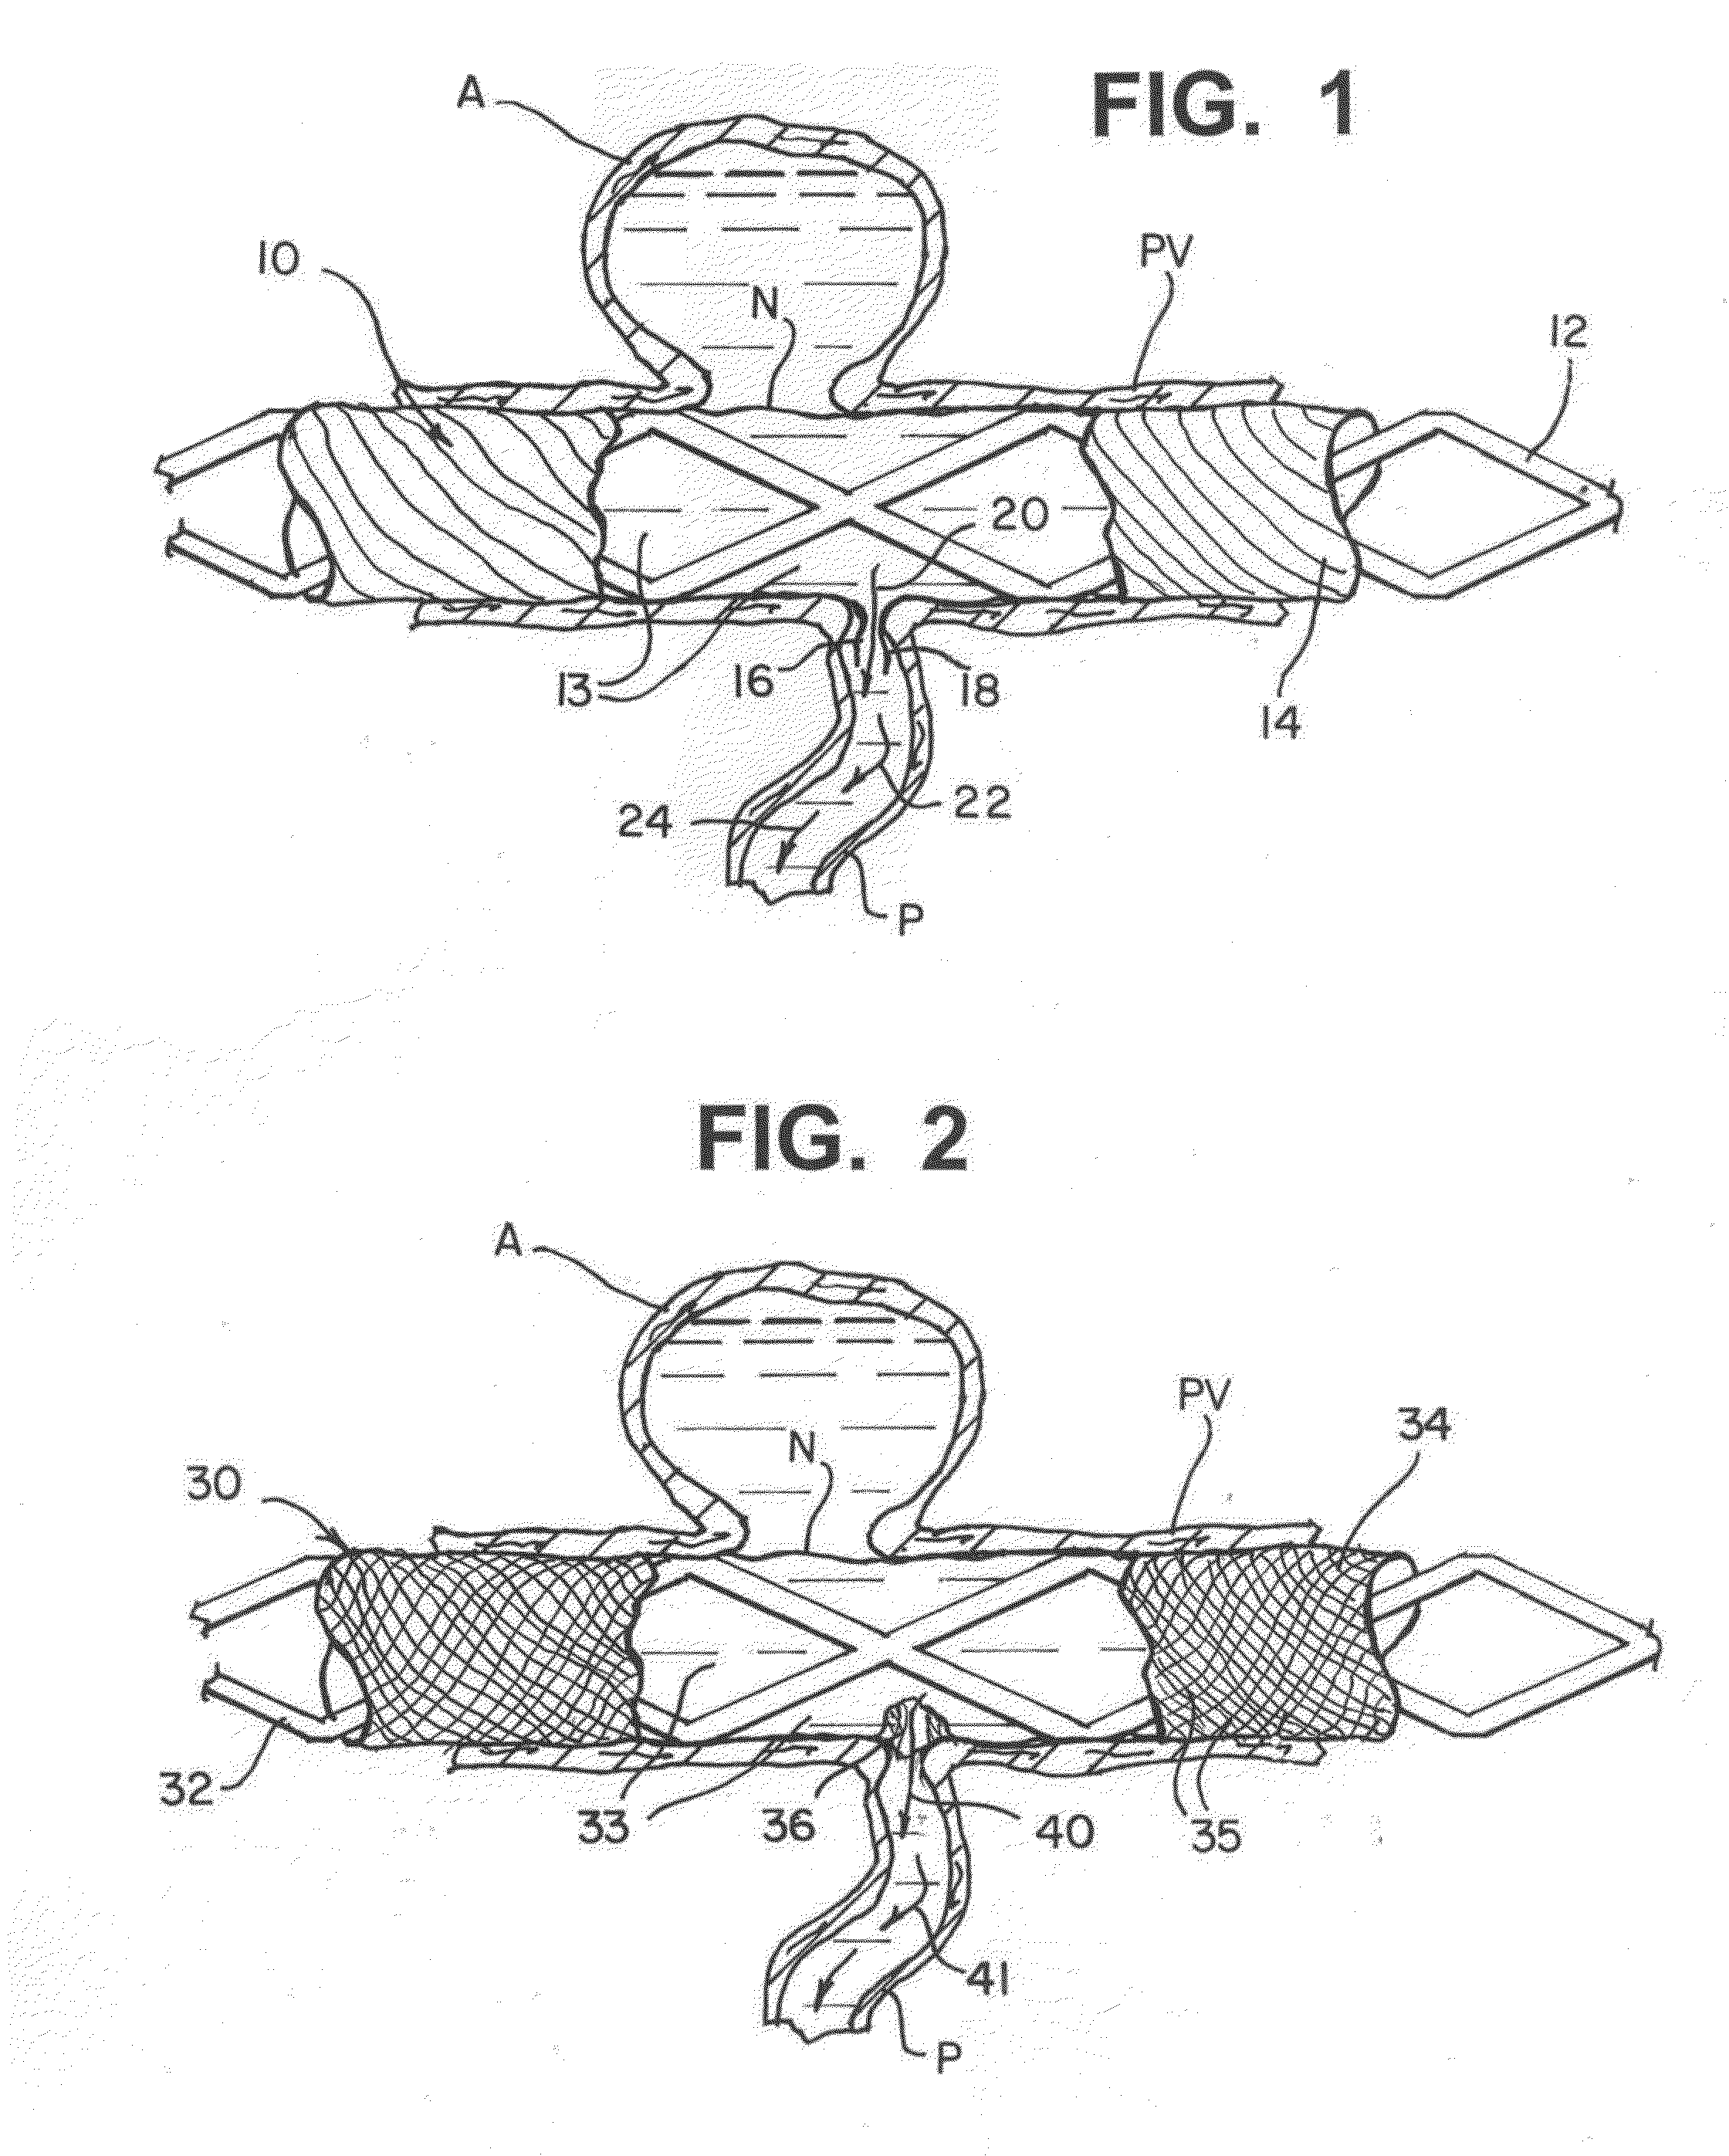 Method of fabricating modifiable occlusion device